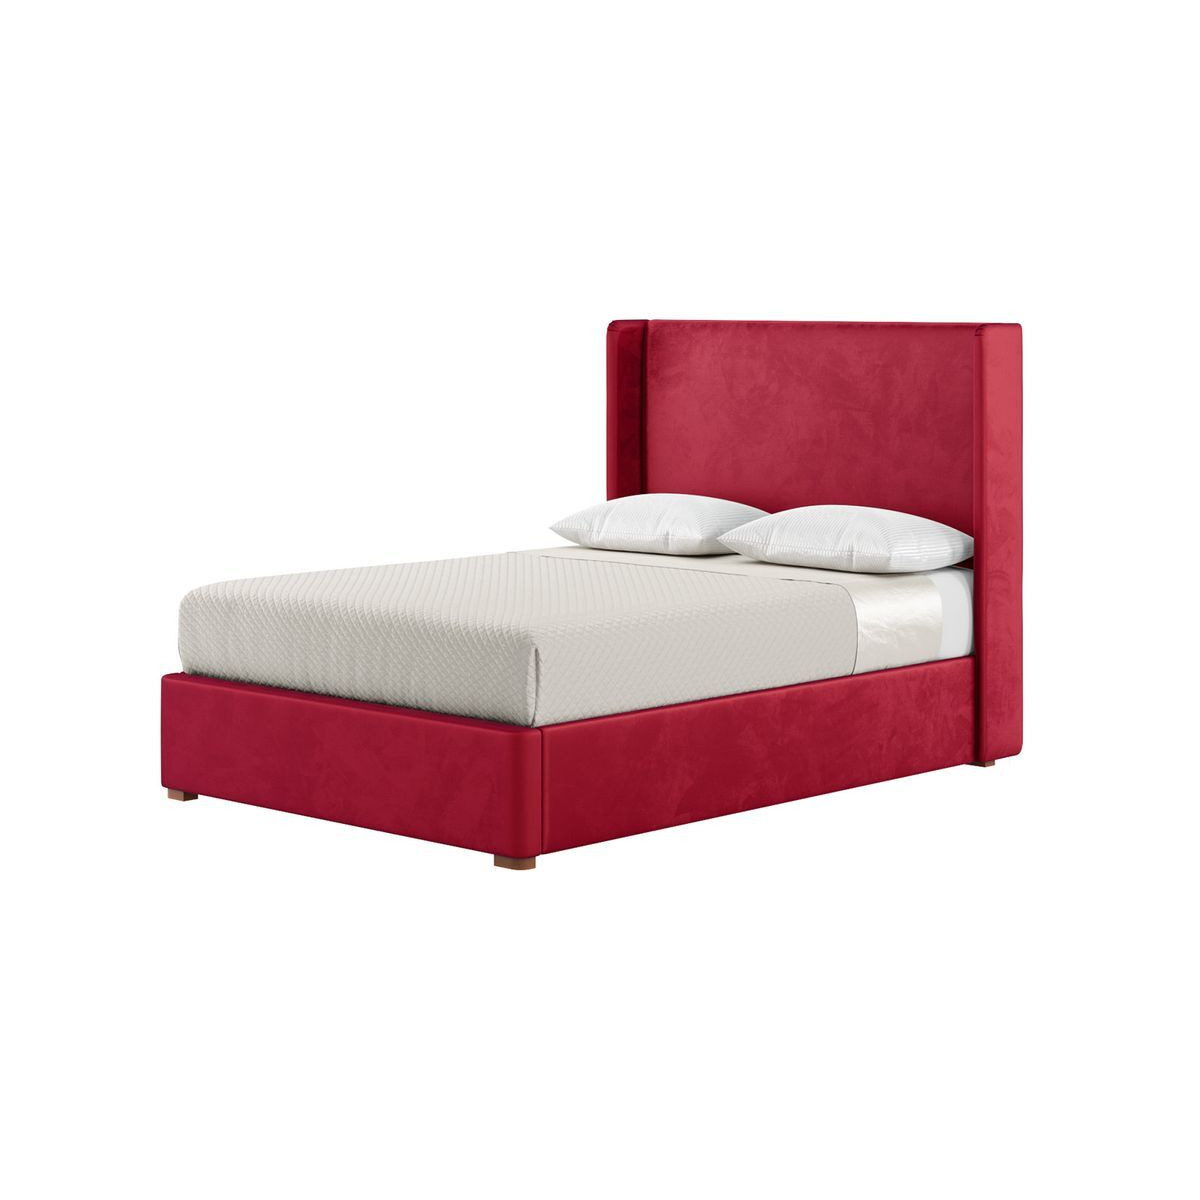 Darcy 4ft6 Double Bed Frame With Modern Smooth Wing Headboard, dark red, Leg colour: aveo - image 1